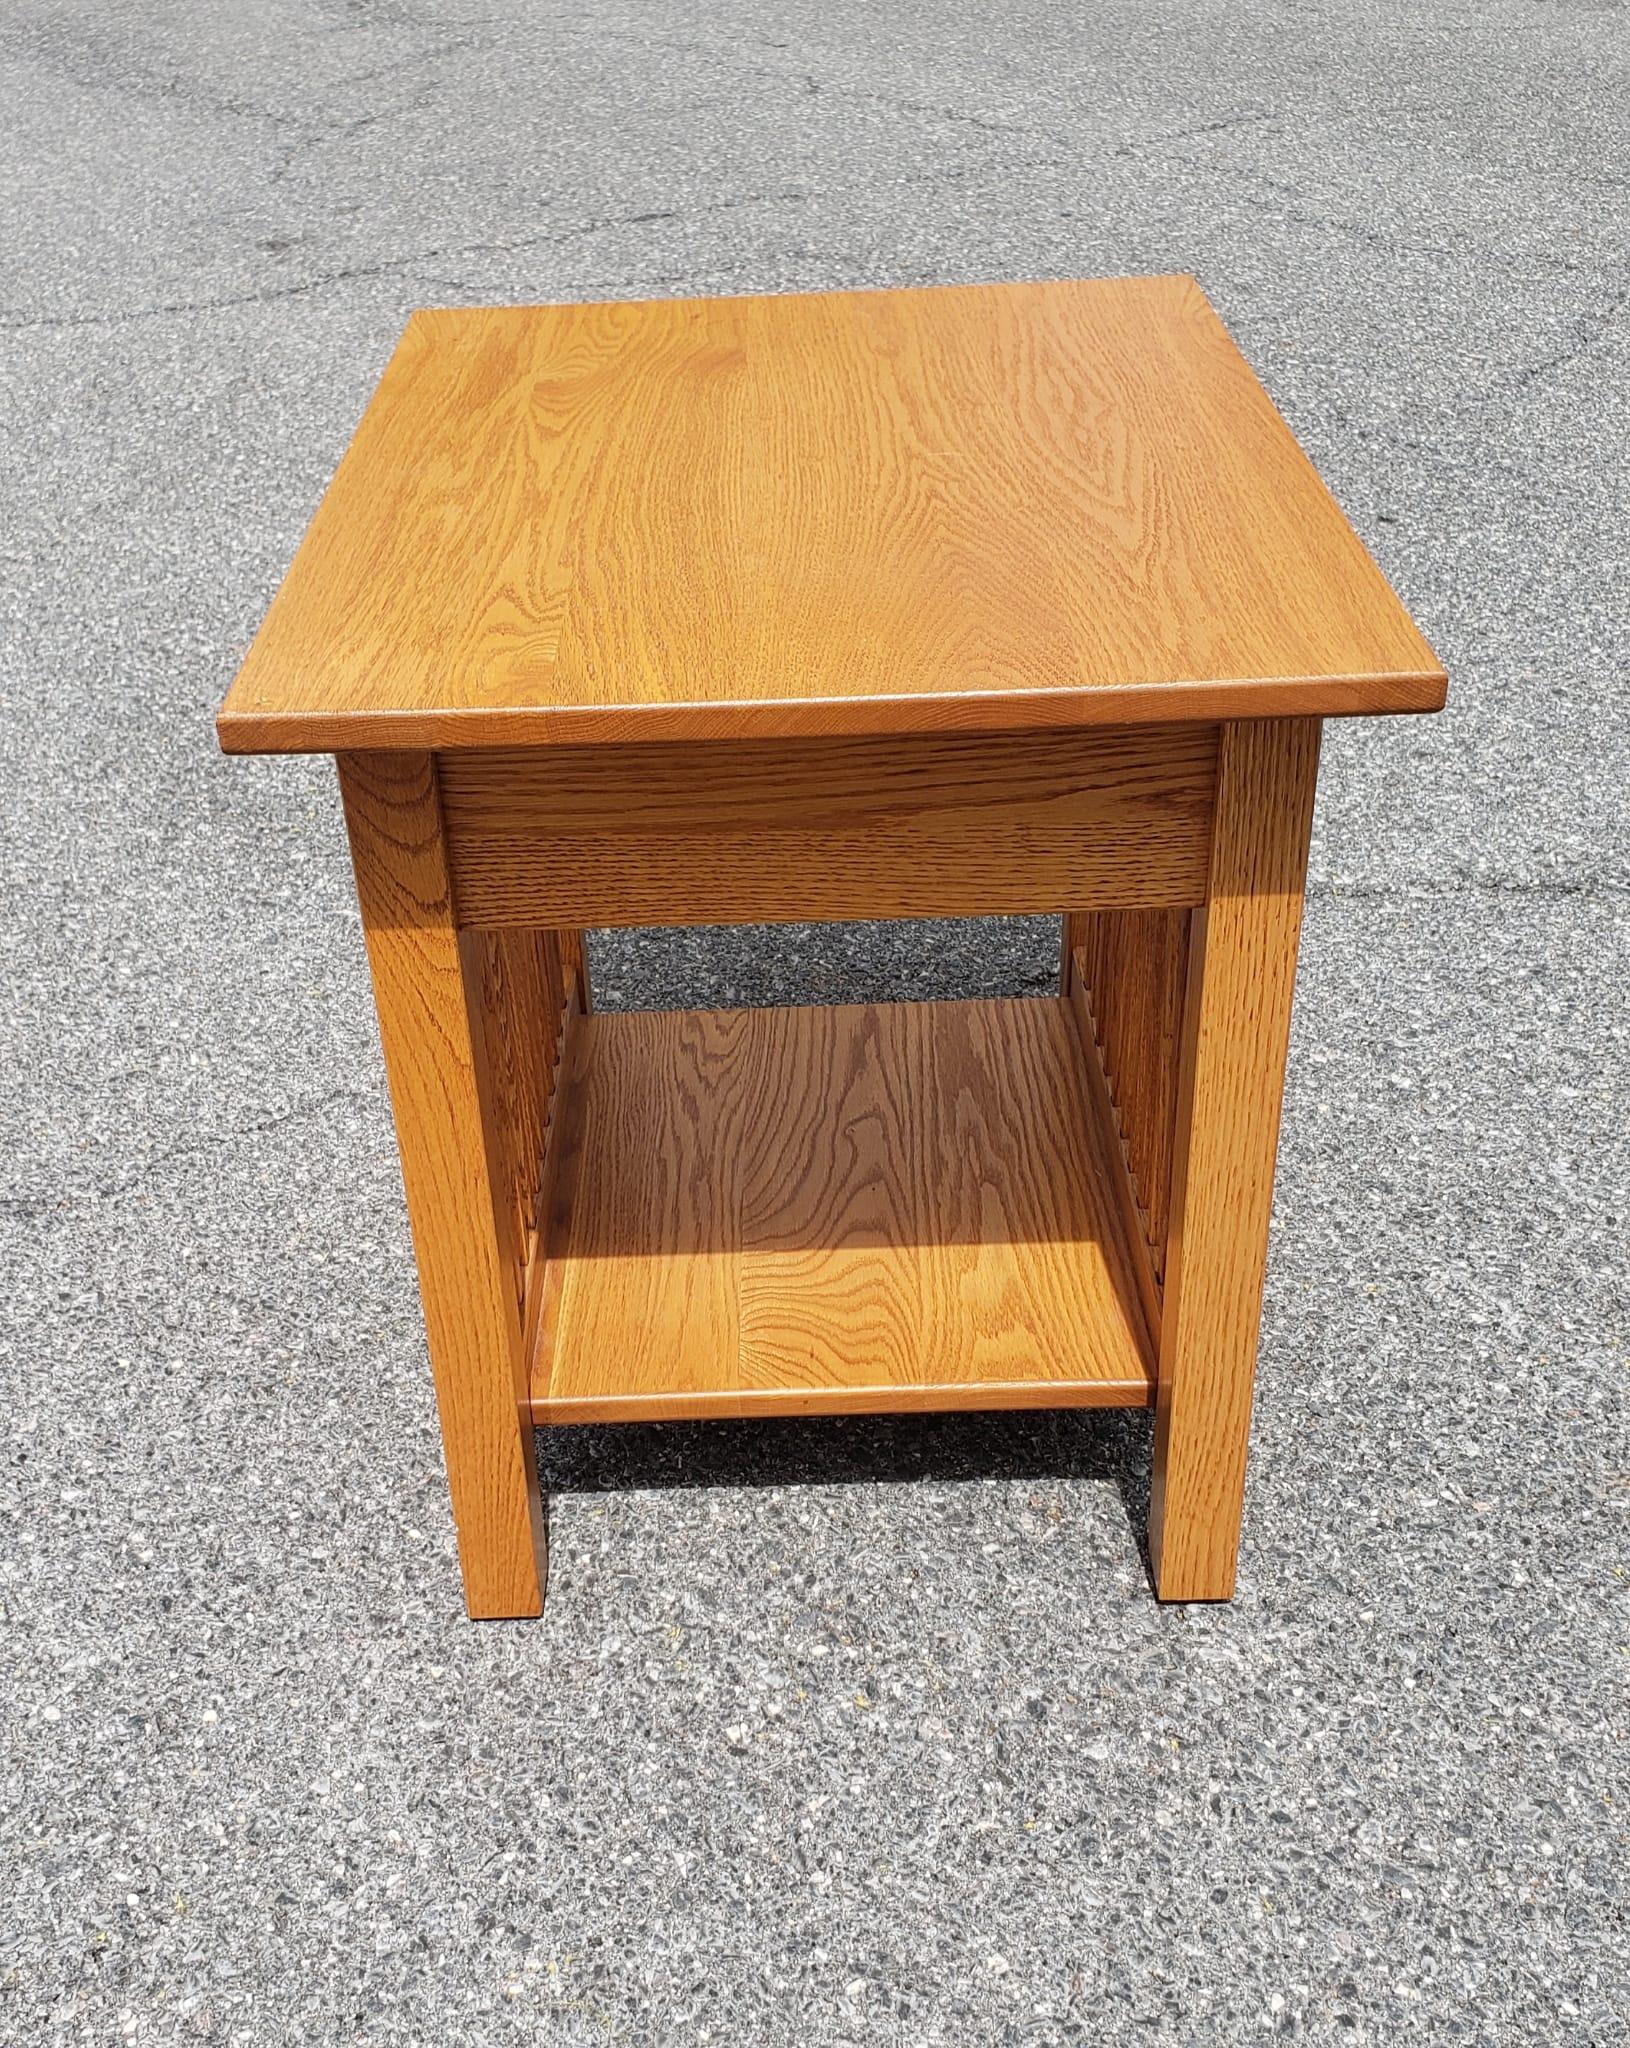 mission style end table plans